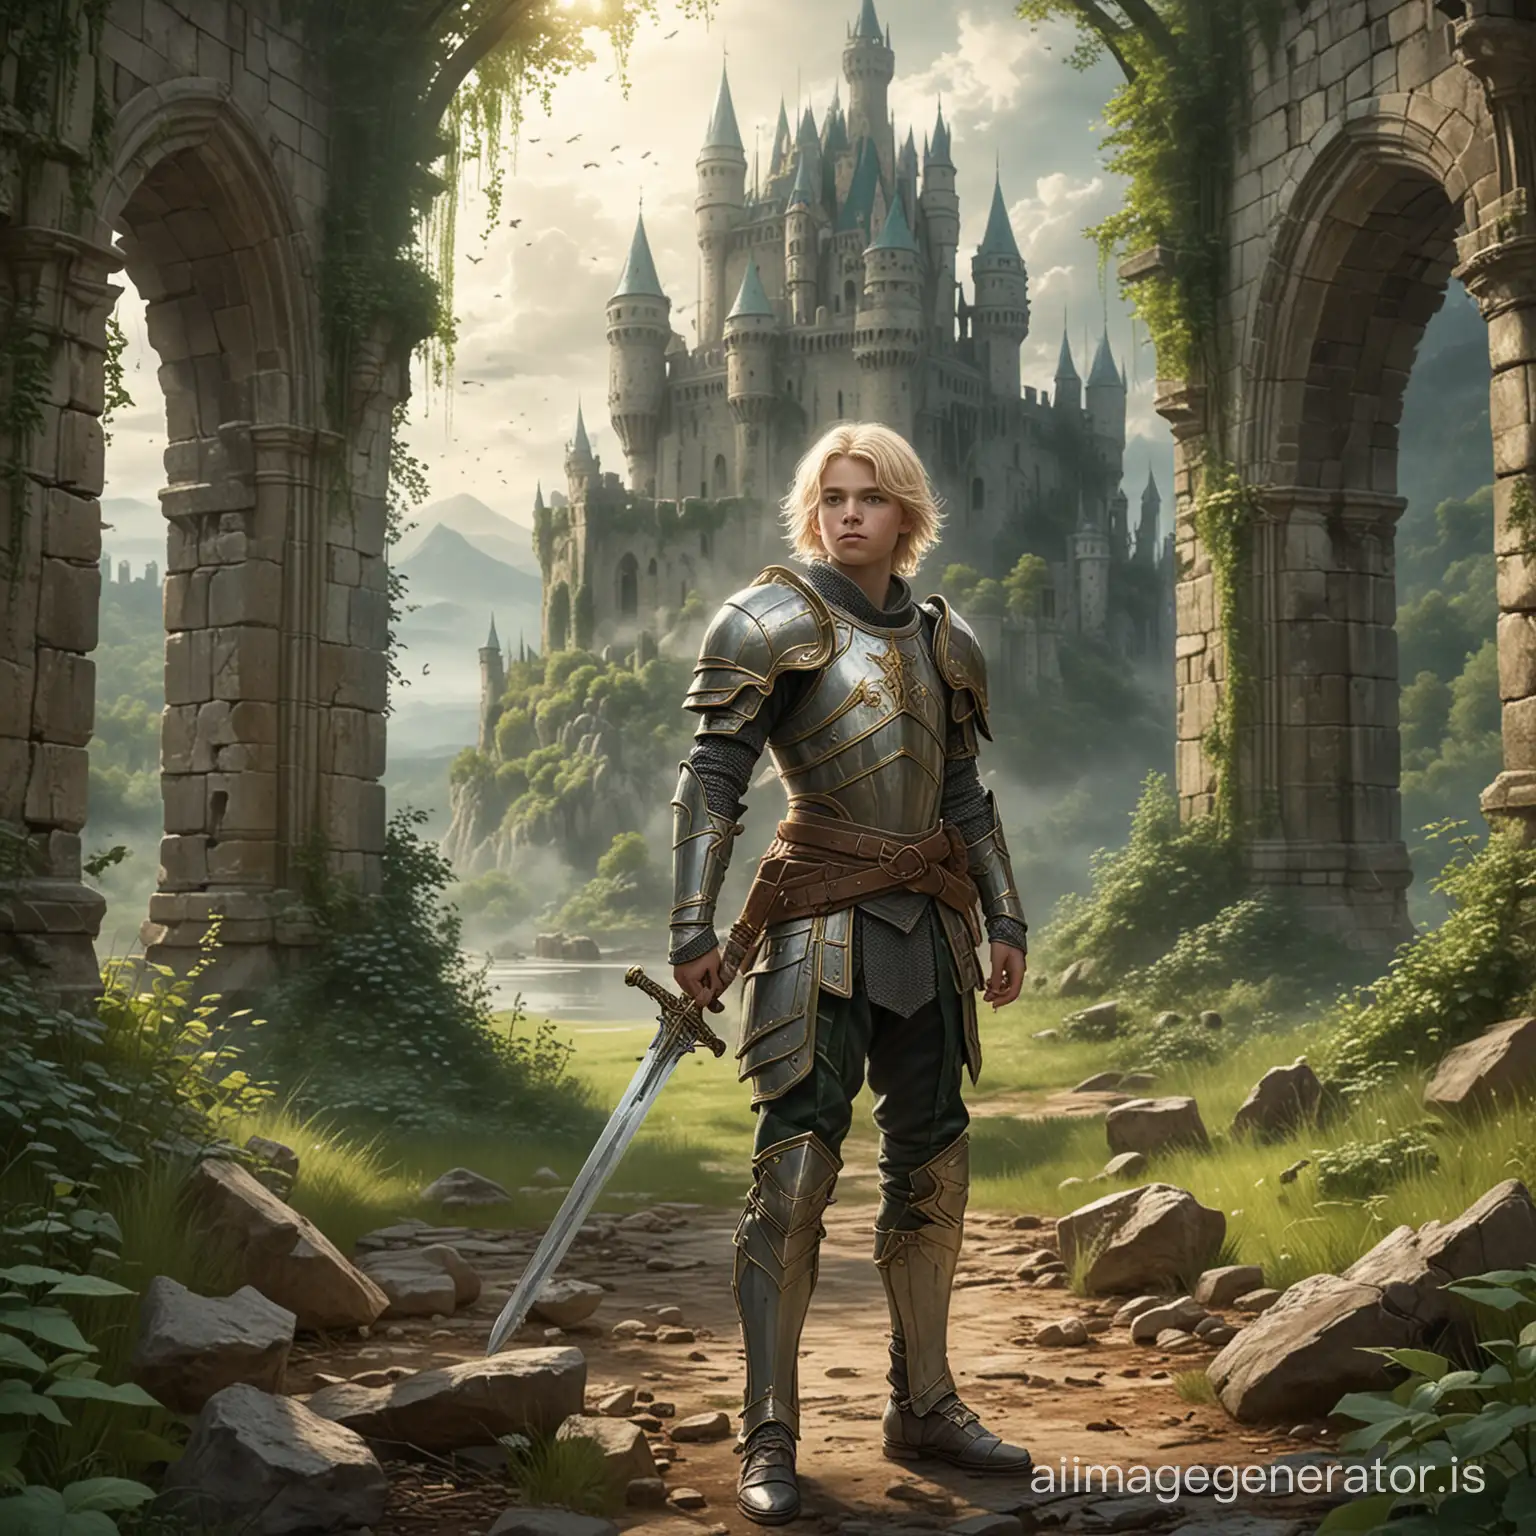 Fantasy-Illustration-Brave-Blond-Teen-Warrior-in-Armor-with-Sword-at-Ruined-Castle-in-Forest